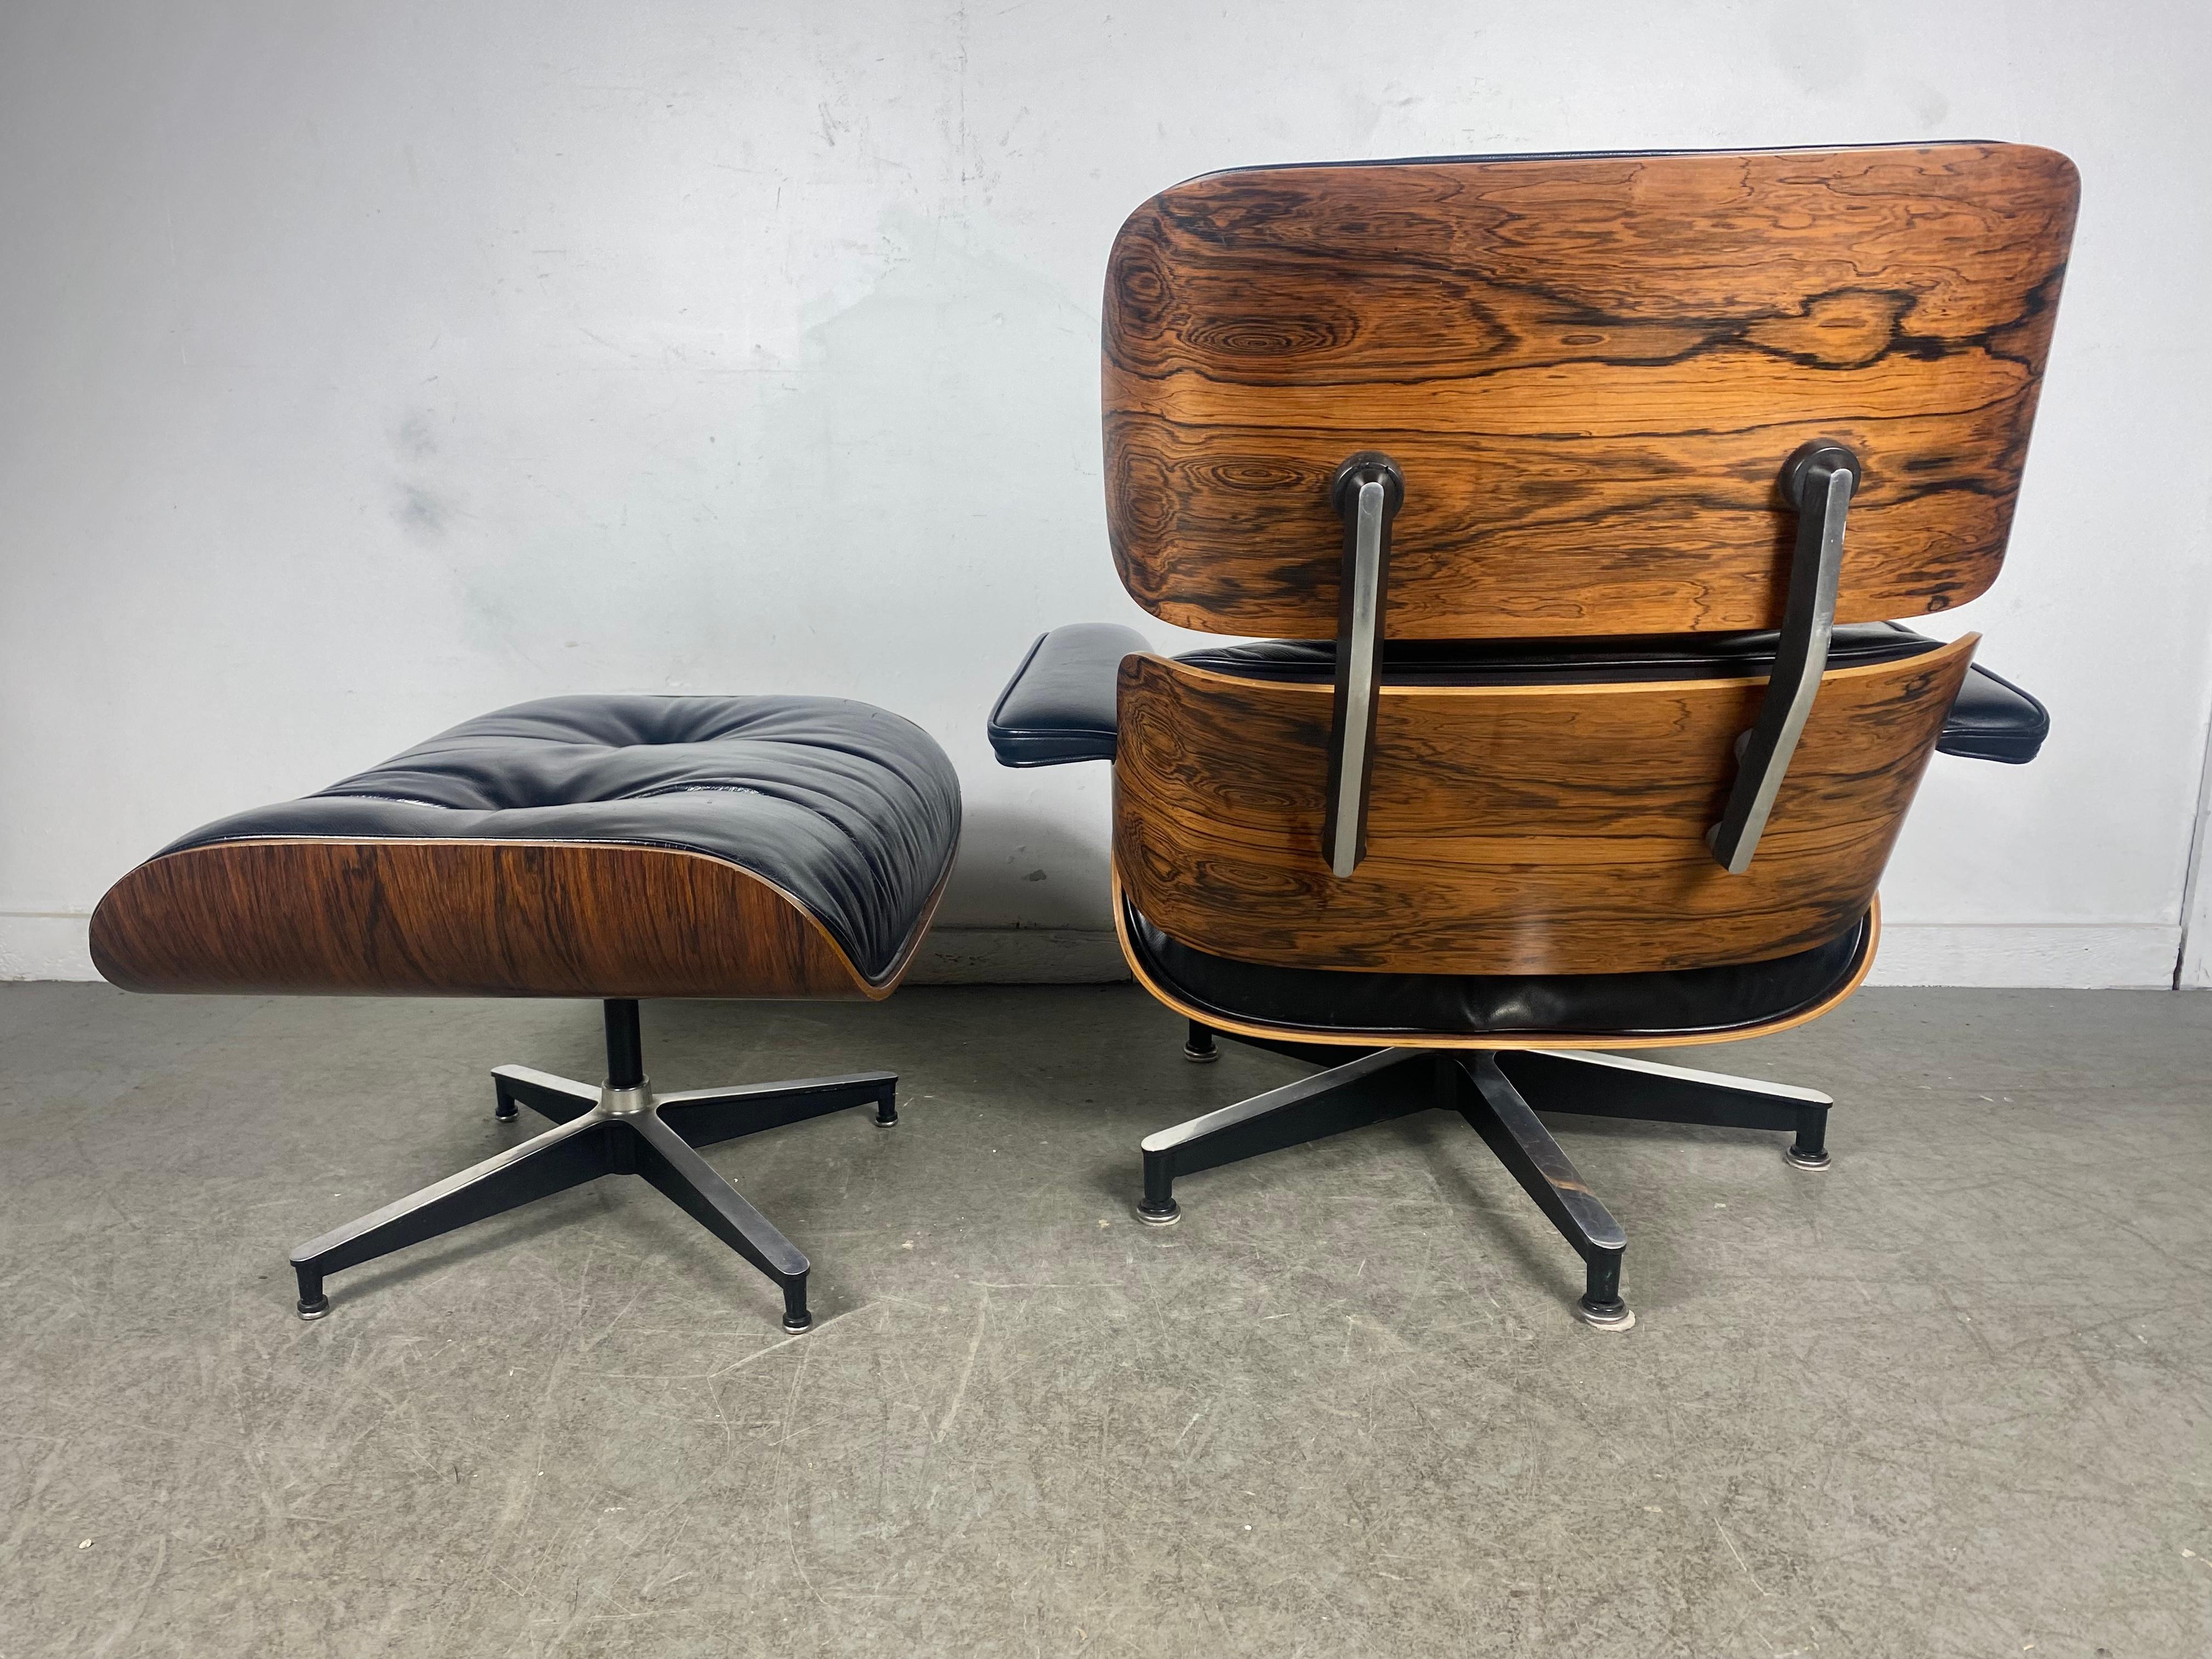 Aluminum Rare 2nd Generation Rosewood, Leather Lounge Chair and Ottoman by Charles Eames